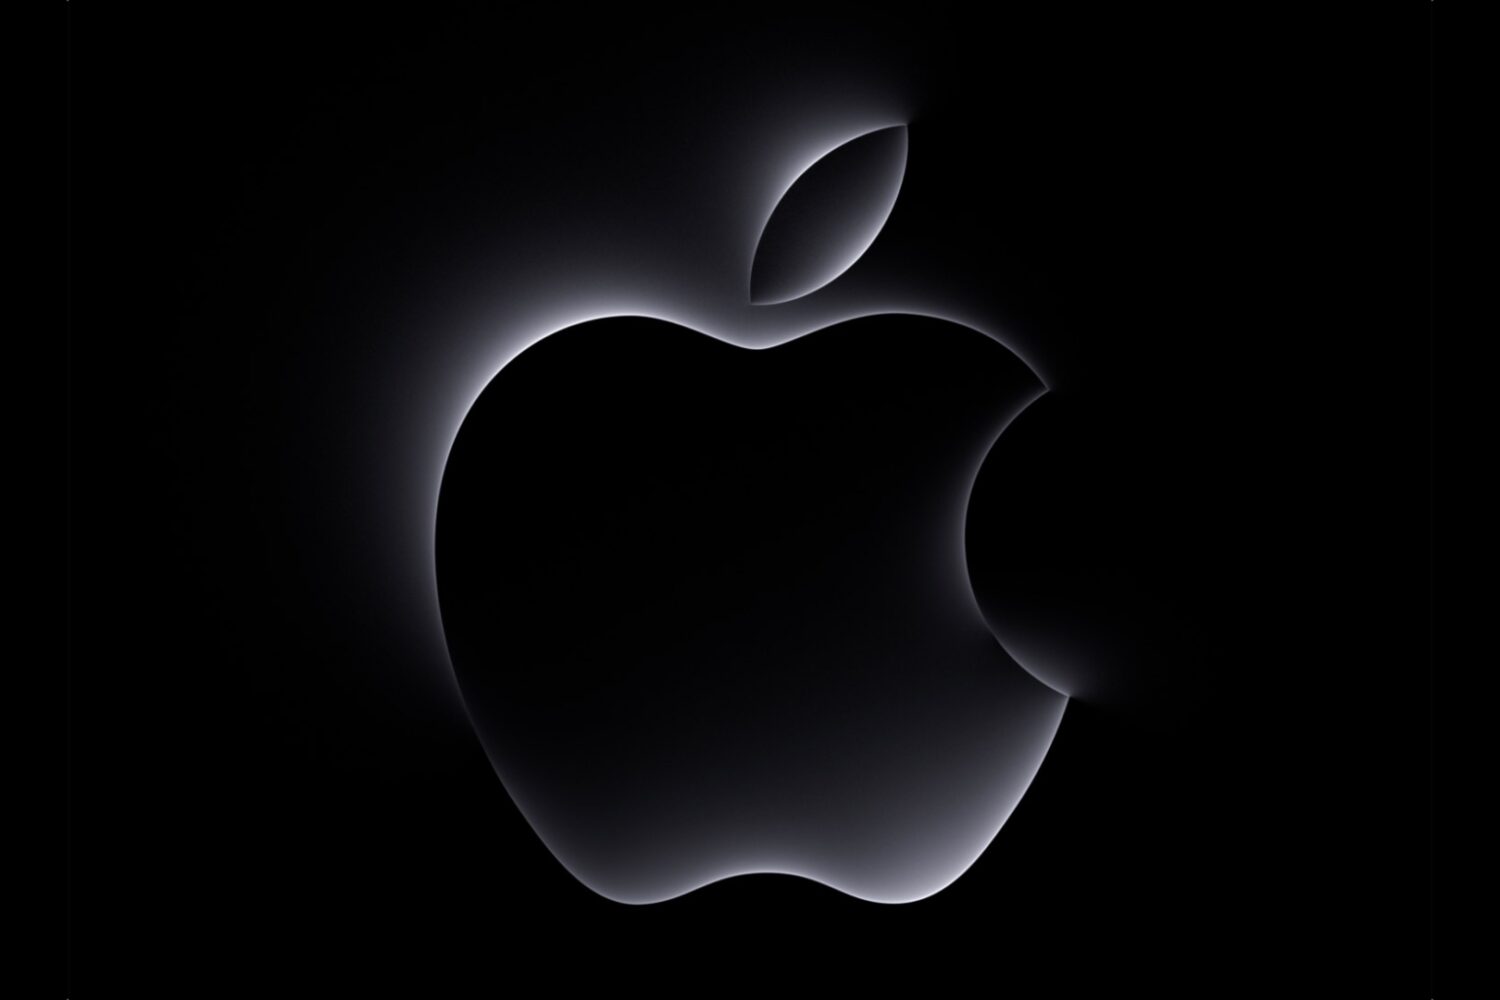 Glowing white Apple logo outline set against a solid black background